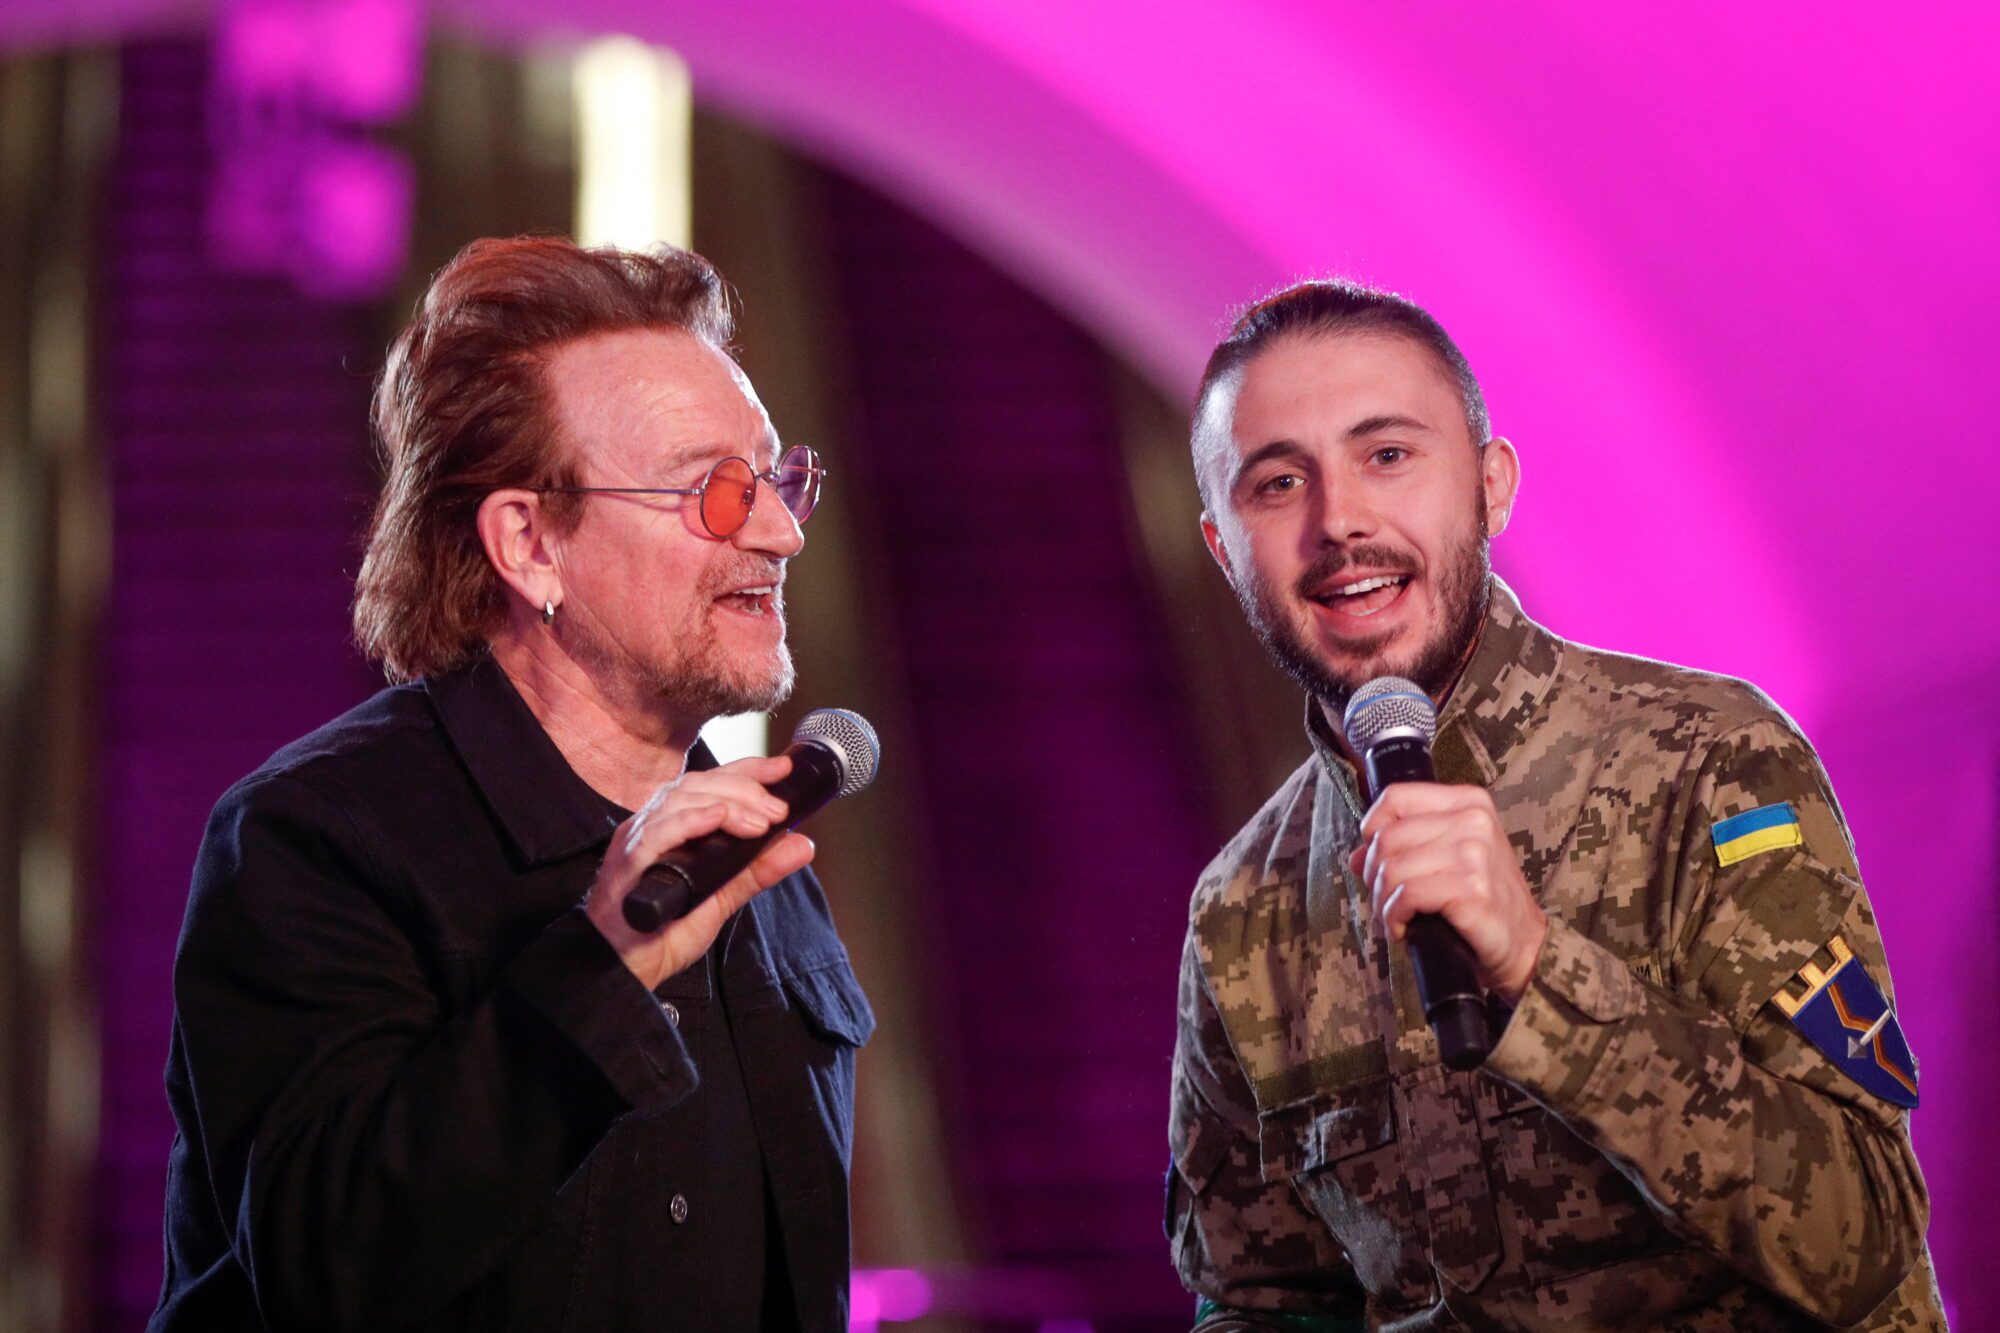 U2 rock band frontman Bono and Ukrainian serviceman and frontman of the Antytila band Taras Topolia sing during a performance for Ukrainian people inside a subway station, as Russia's attack on Ukraine continues, in Kyiv, Ukraine May 8, 2022.  REUTERS/Valentyn Ogirenko